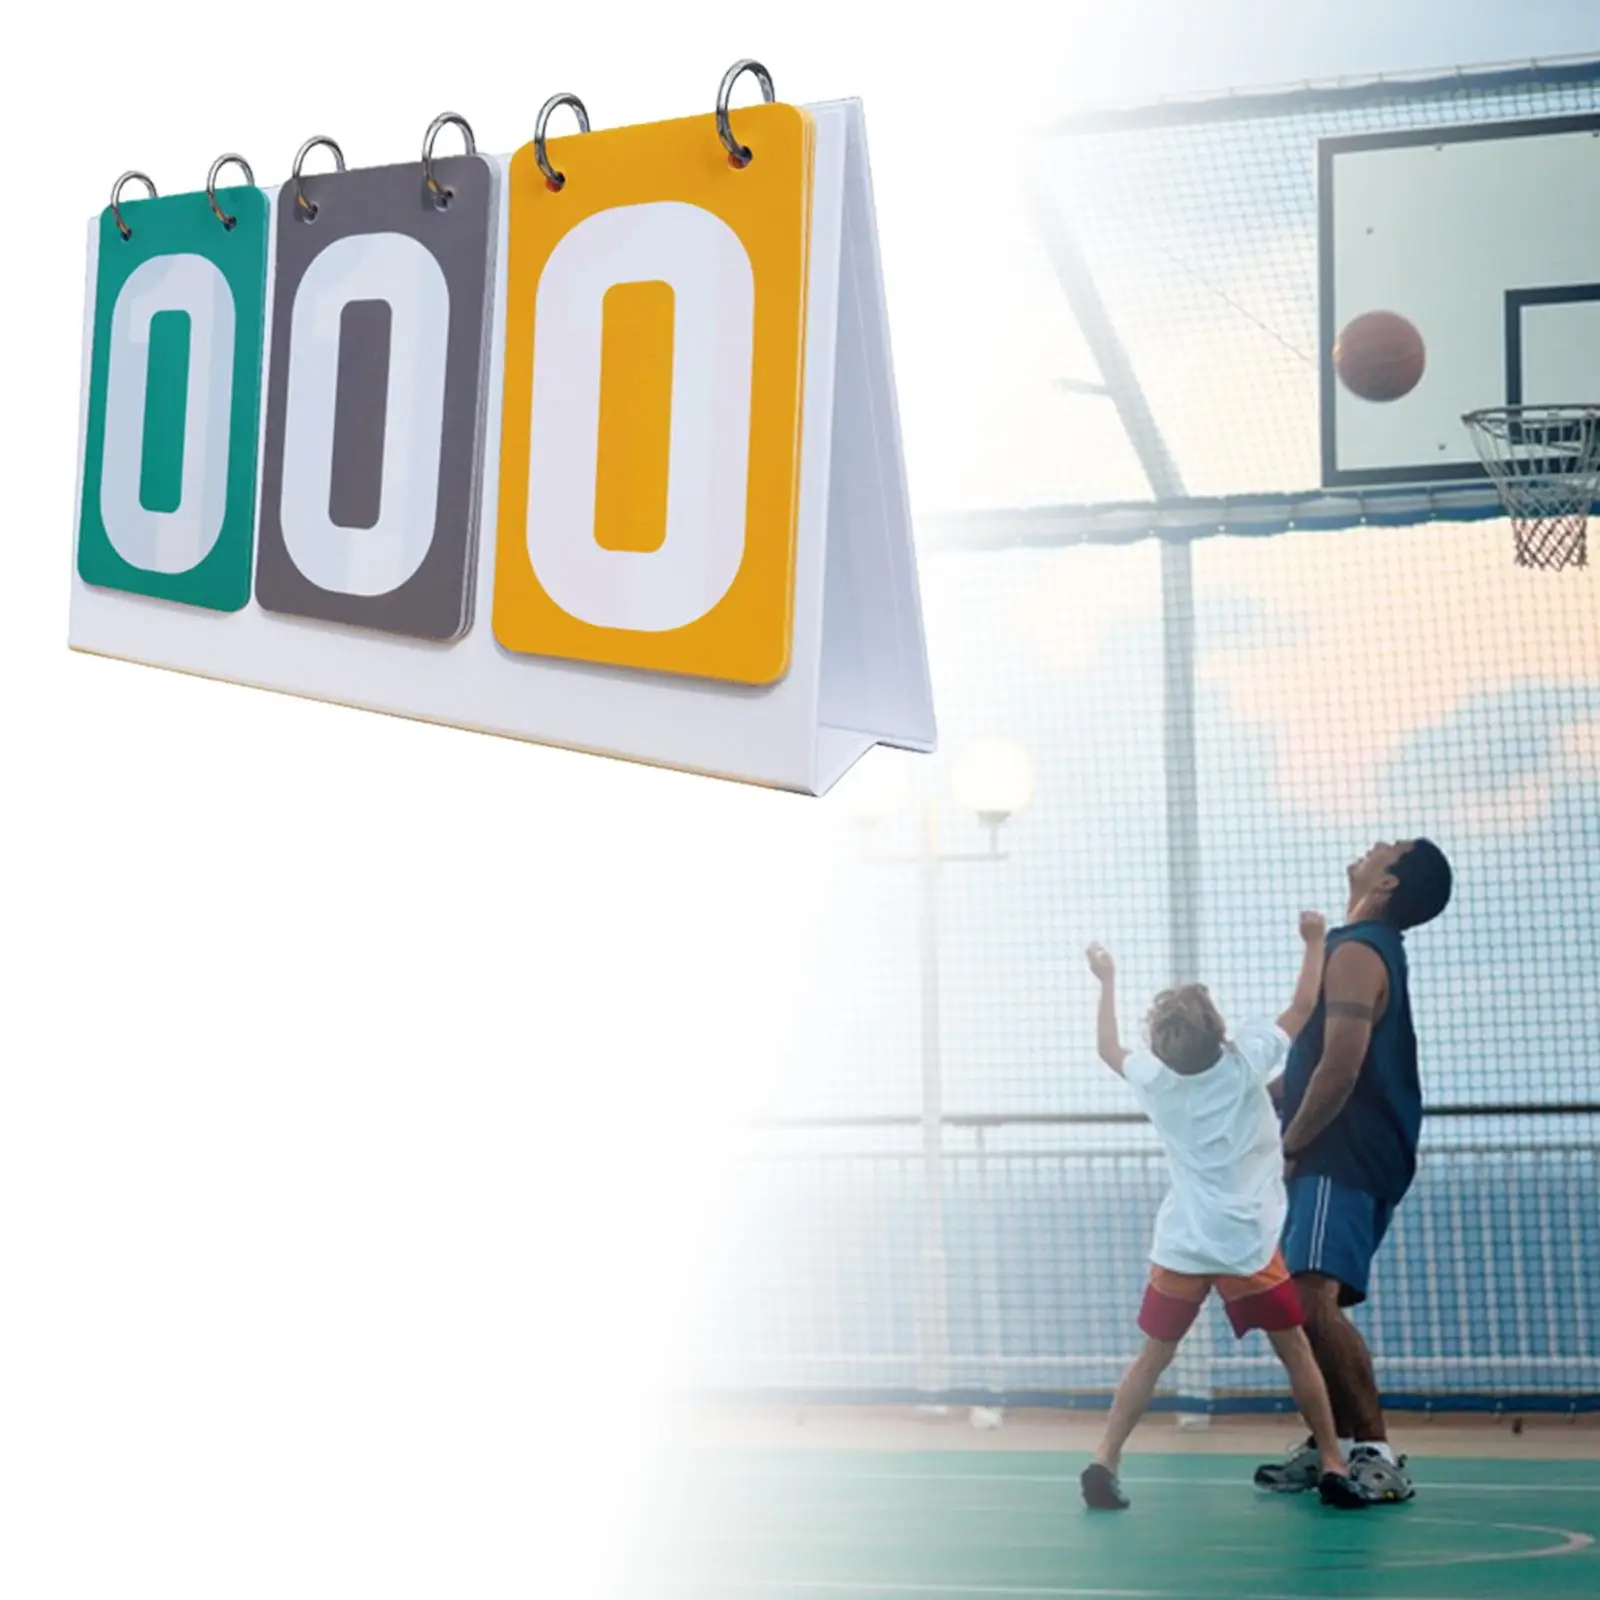 Table Score Flippers 3 digits Portable Sports Scoreboard Flip Number Score Board for Games Baseball Coaches Volleyball Outdoor